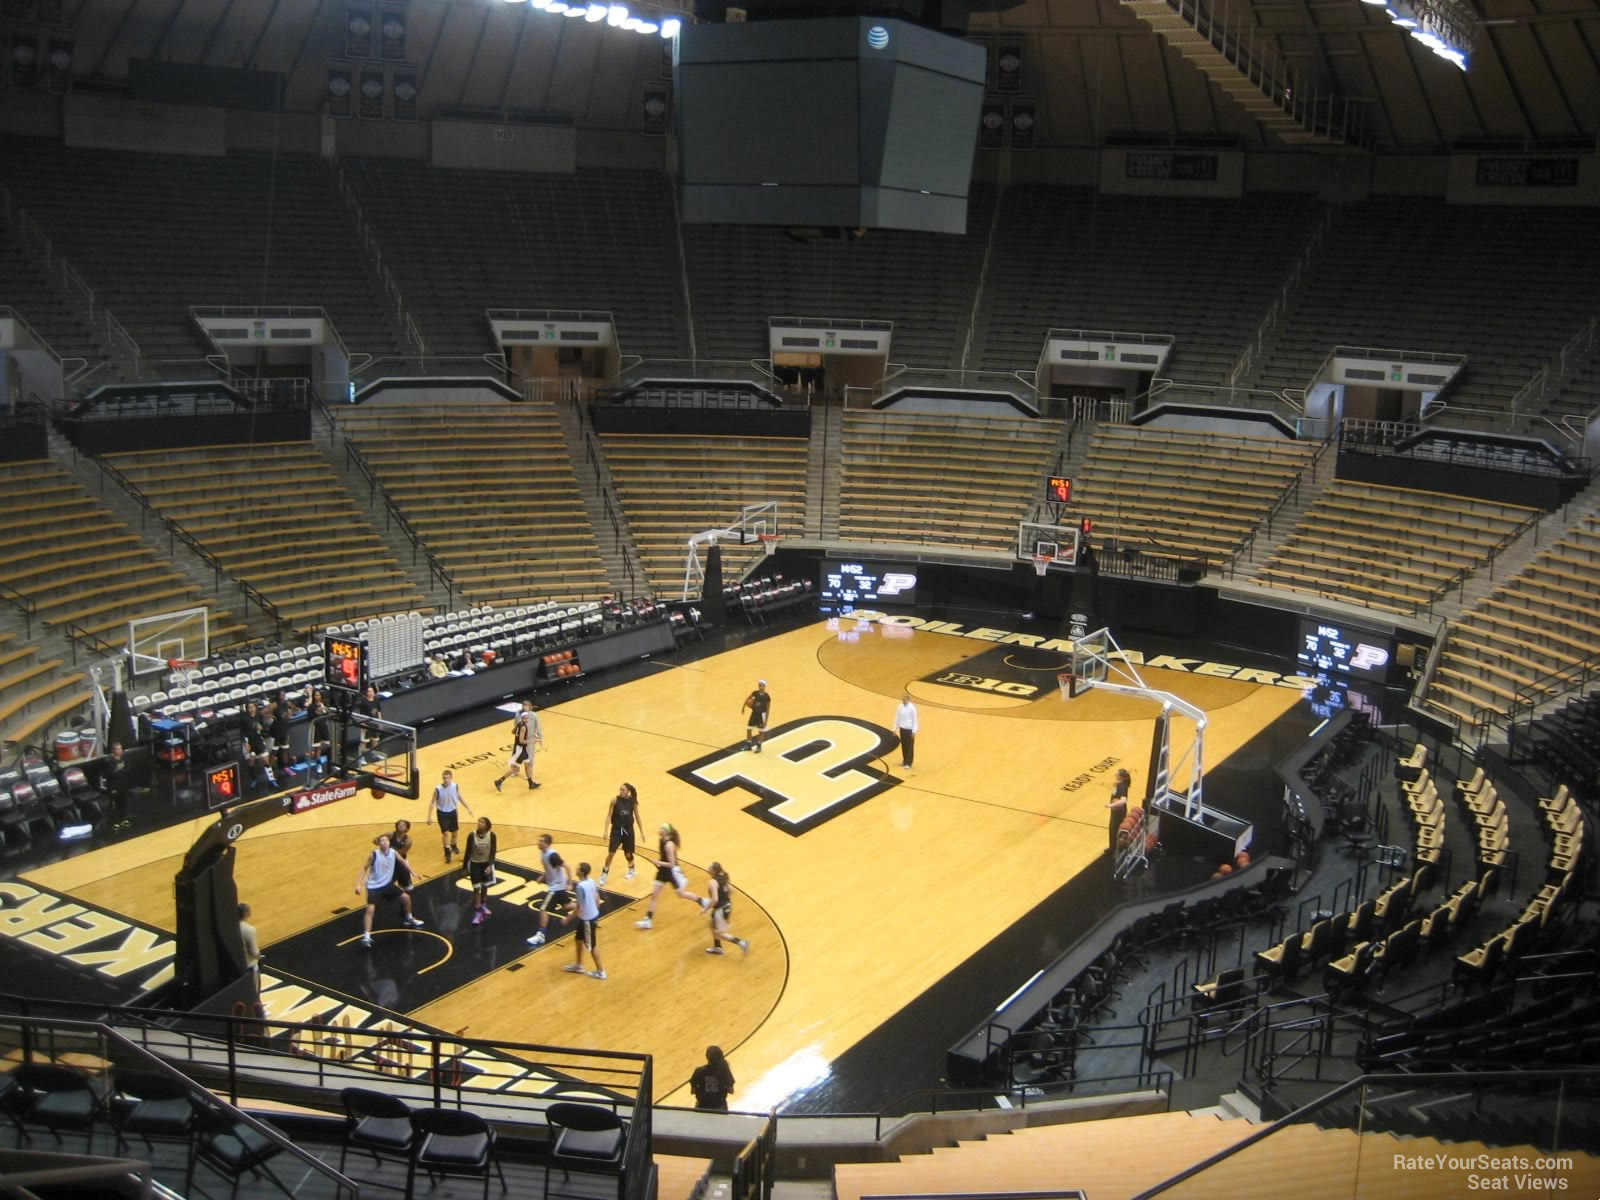 section 114, row 10 seat view  - mackey arena